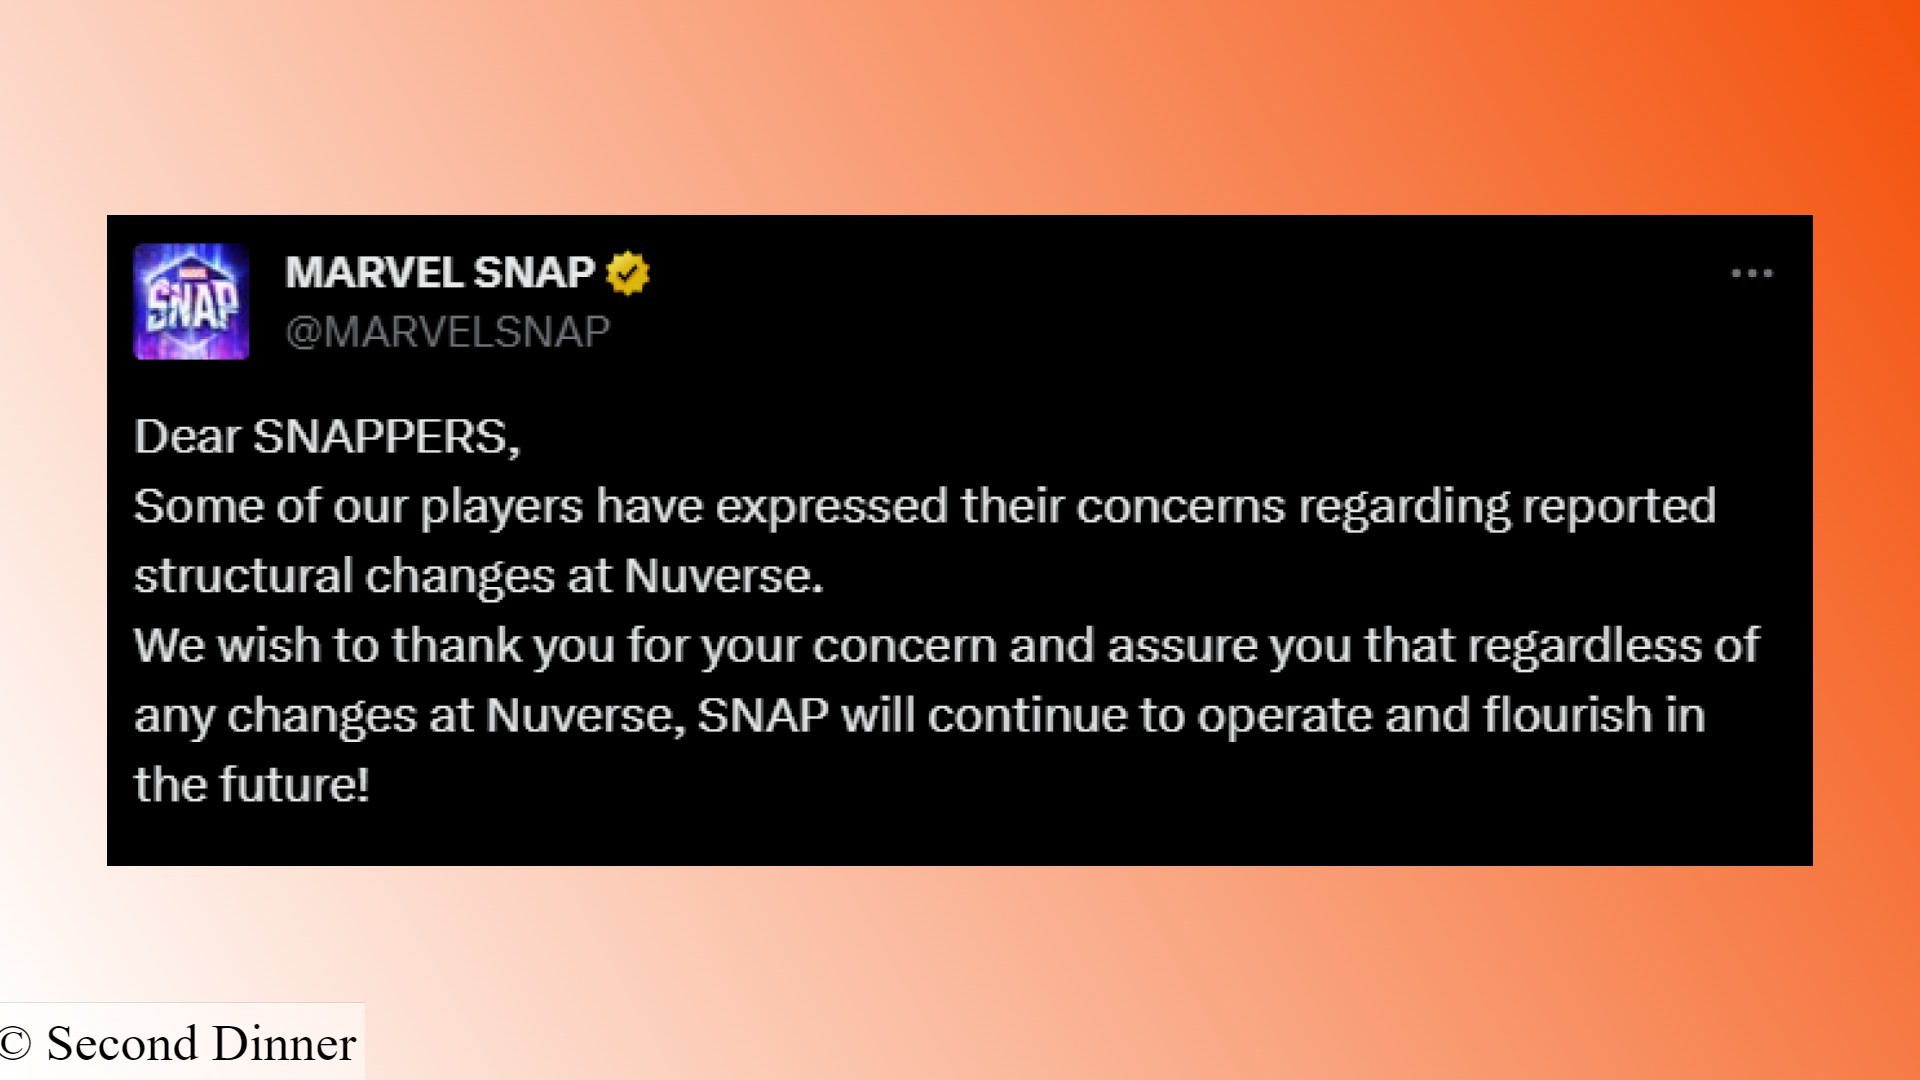 Marvel Snap shut down: A statement from Marvel Snap Twitter about the superhero card game